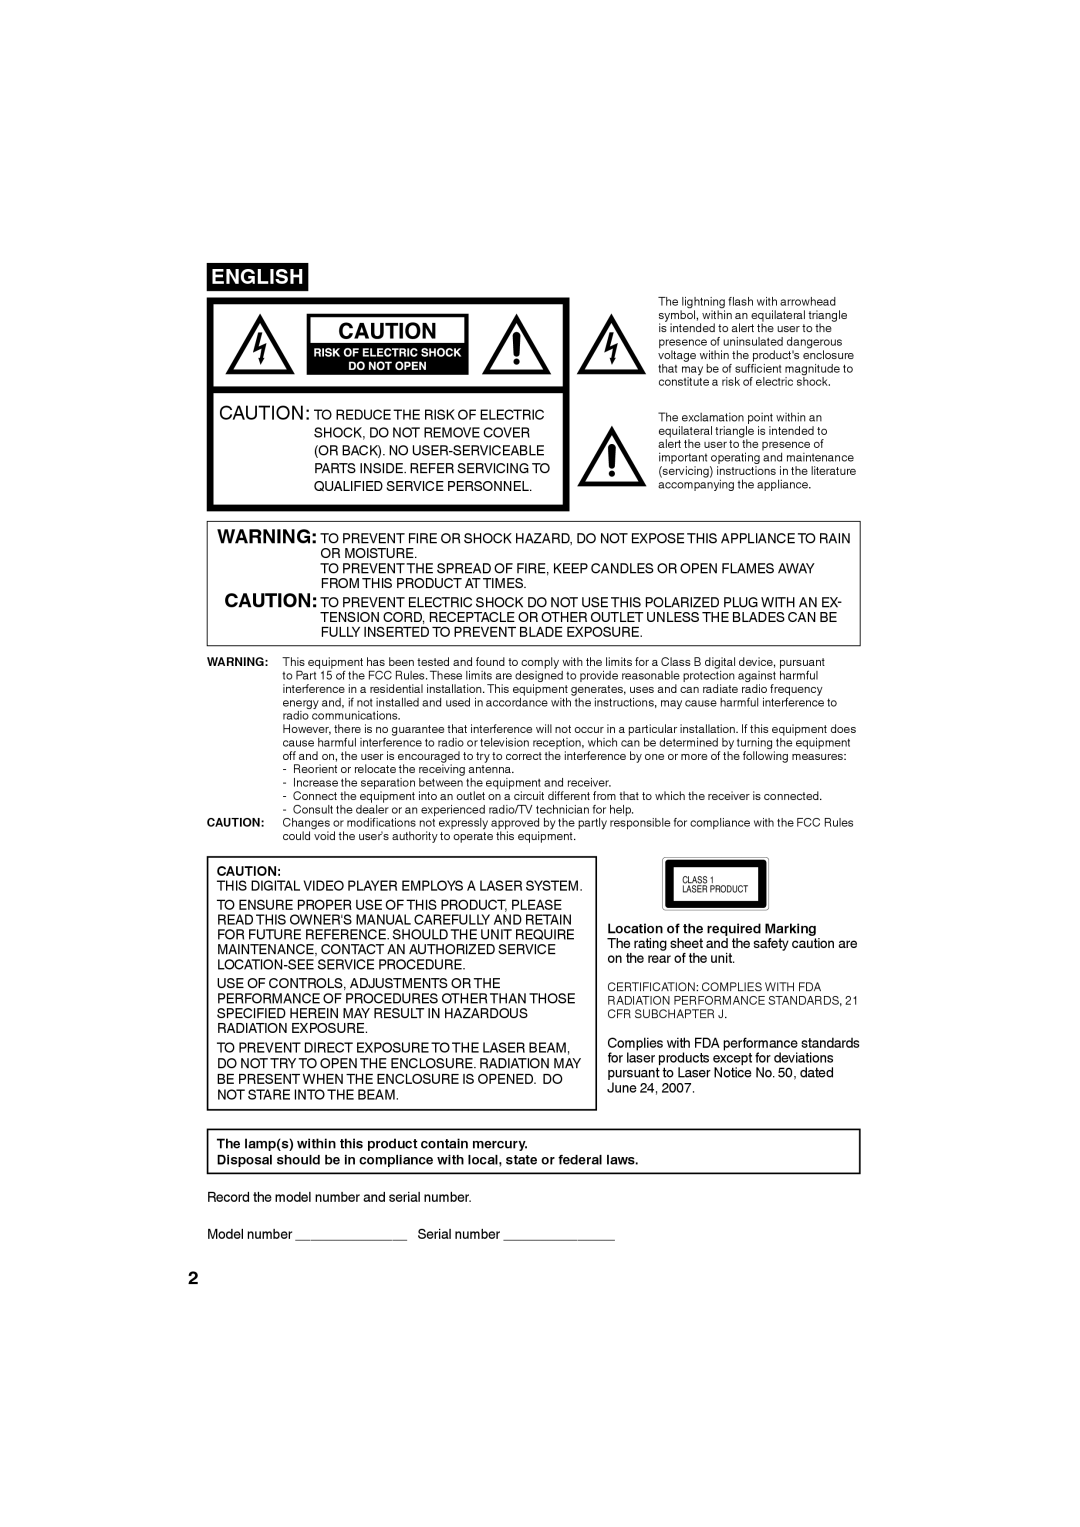 Sansui HDLCDVD265 owner manual English, Location of the required Marking, The lamps within this product contain mercury 